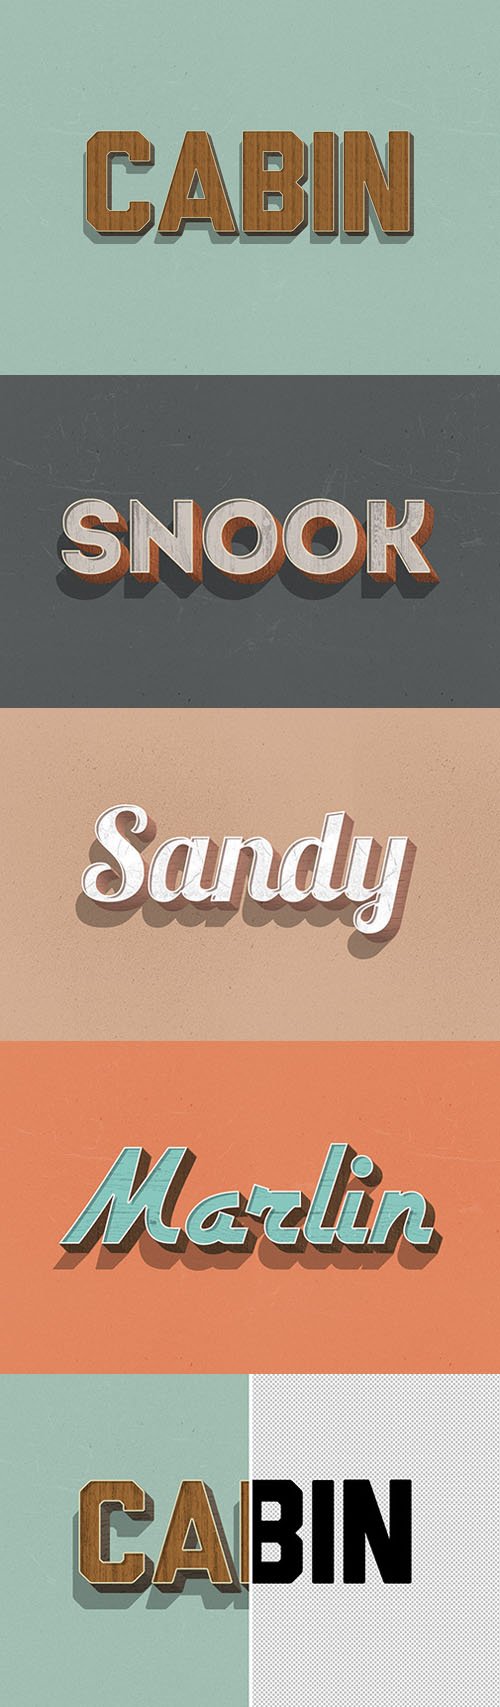 Retro 3D Wood PSD Text Effects